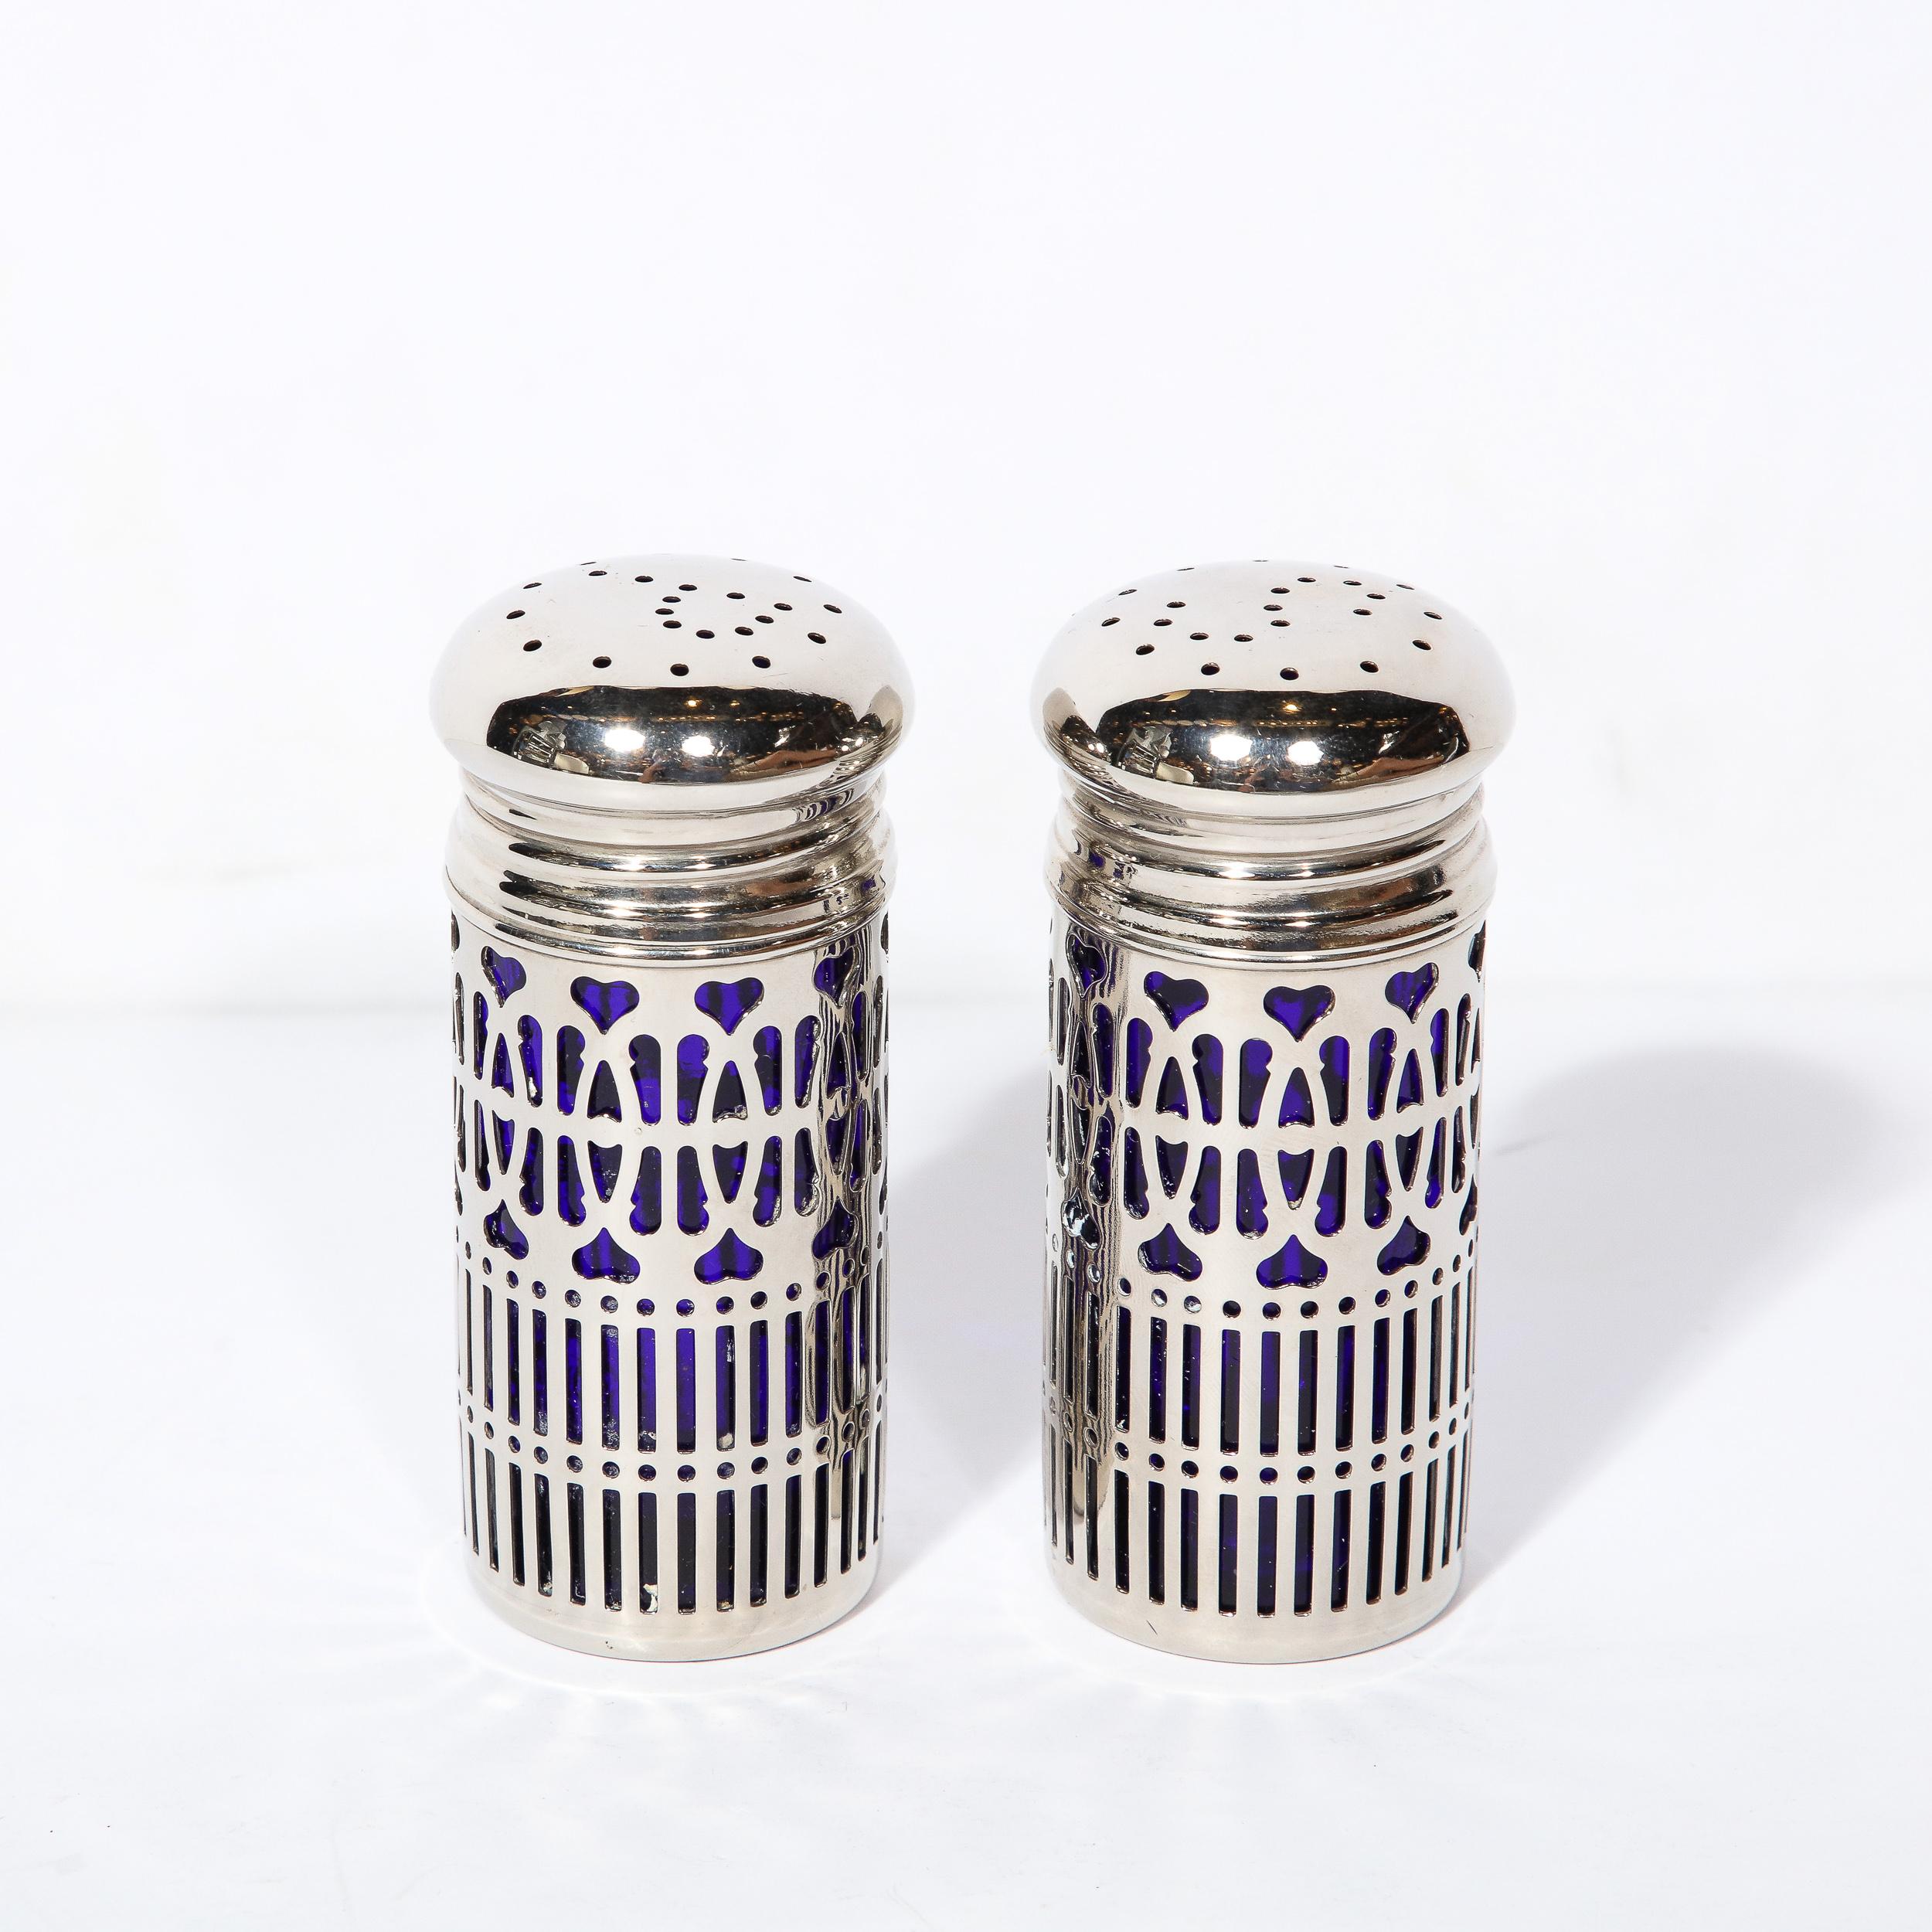 This pair of Art Deco Silver Plate and Cobalt Blue Glass Salt and Pepper Shakers originates from the United States during the 20th Century. Features beautiful geometric cut-out patterning consisting of looping arches and hearts resembling the